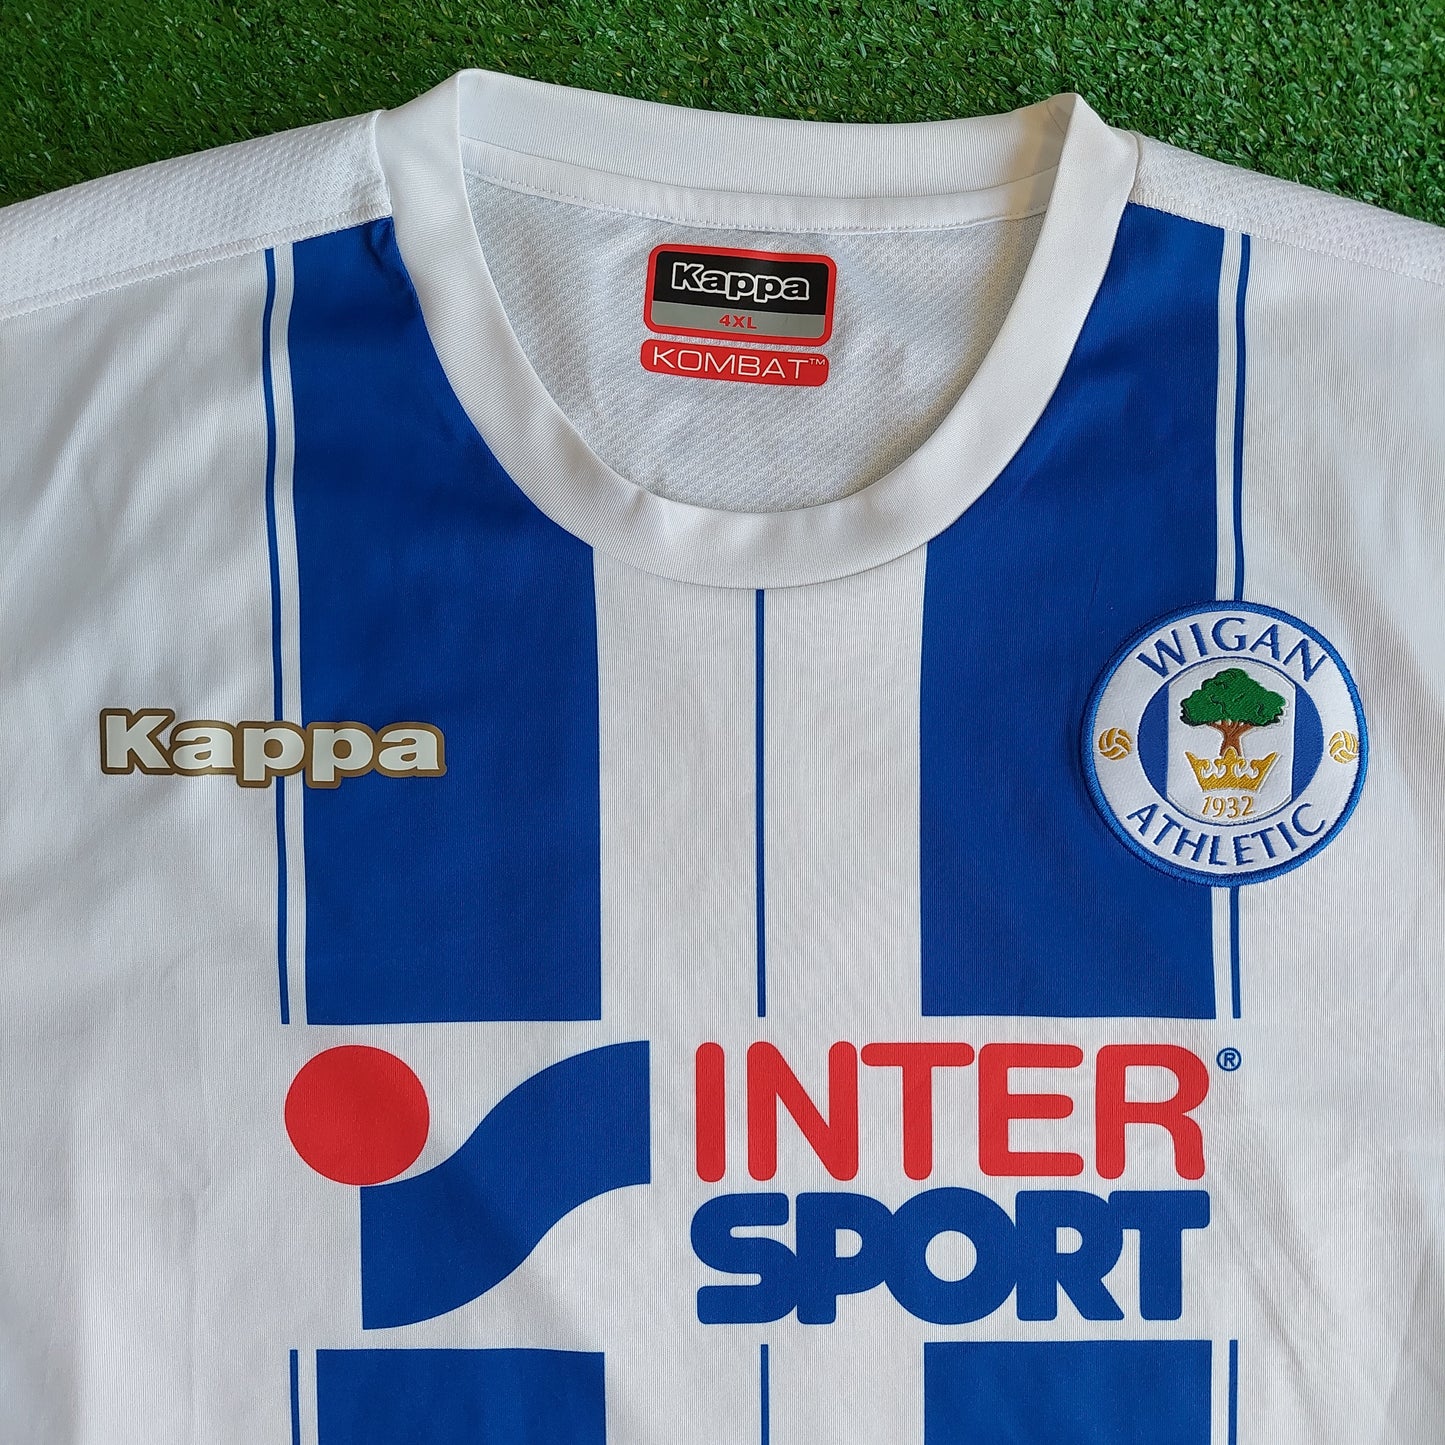 Wigan Athletic 2017/18 Home Shirt (Very Good) - Size 4XL